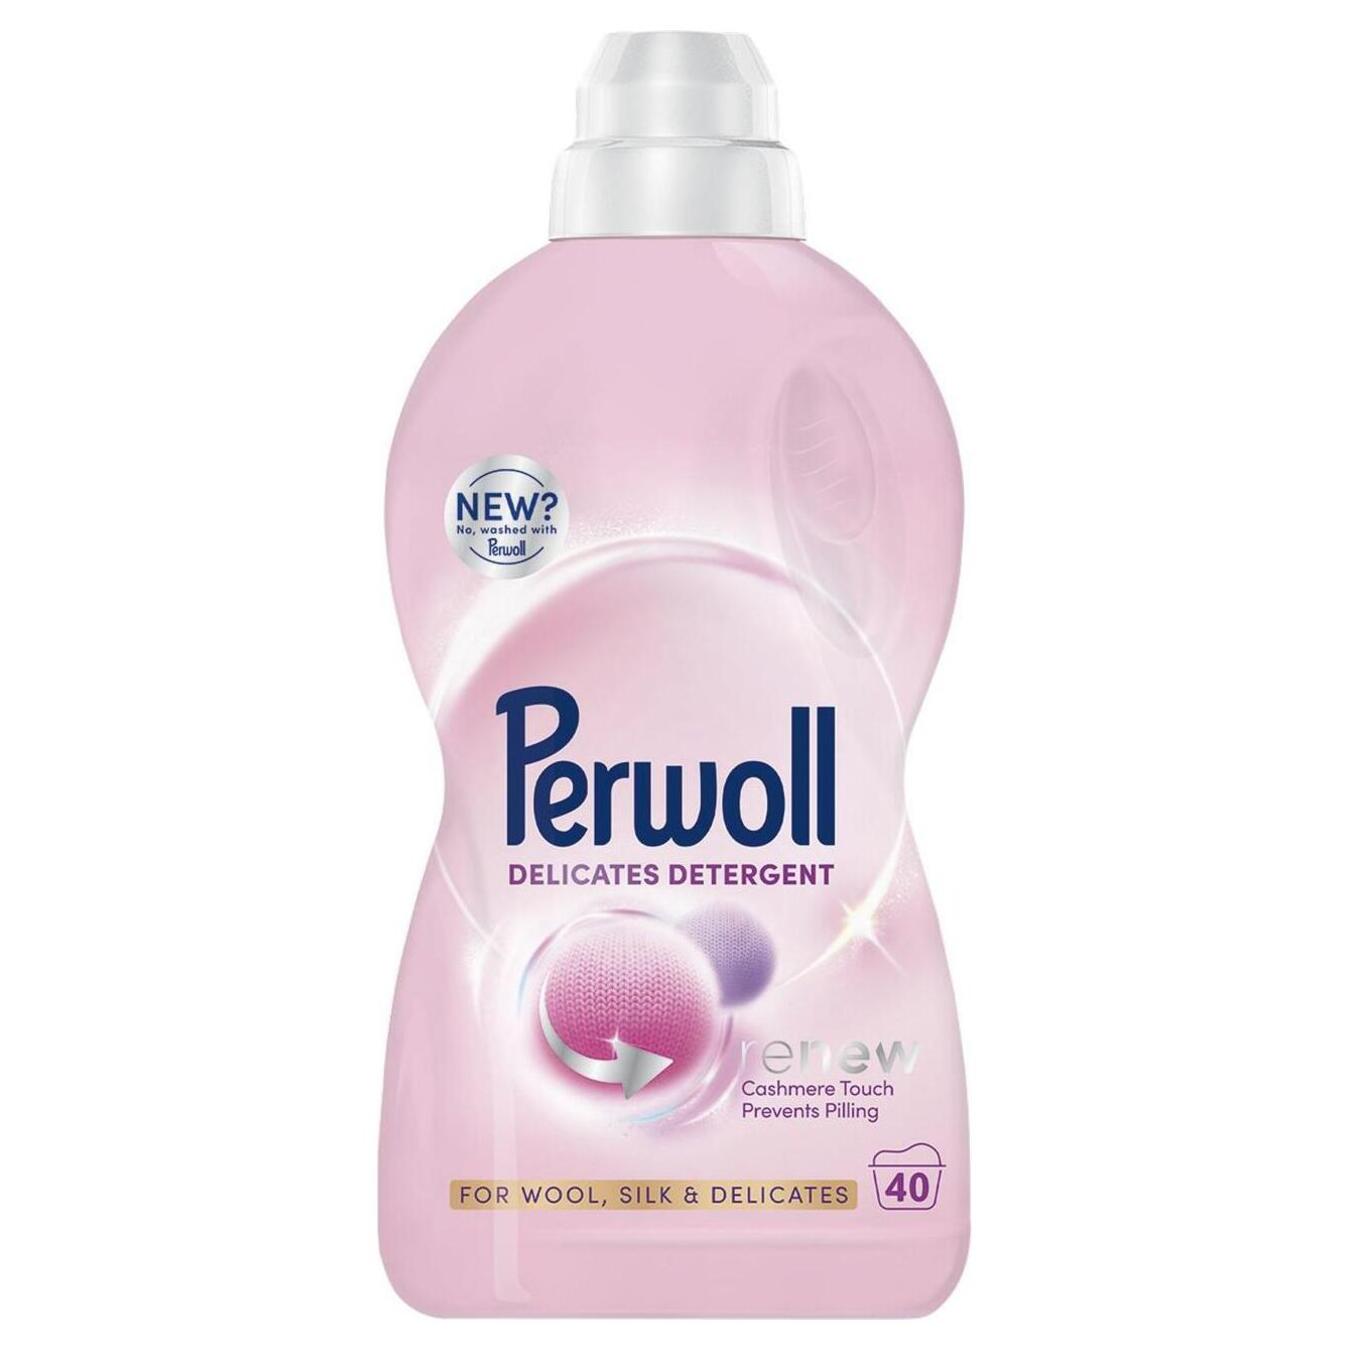 Perwoll washing gel for wool, silk and delicate fabrics 2 l